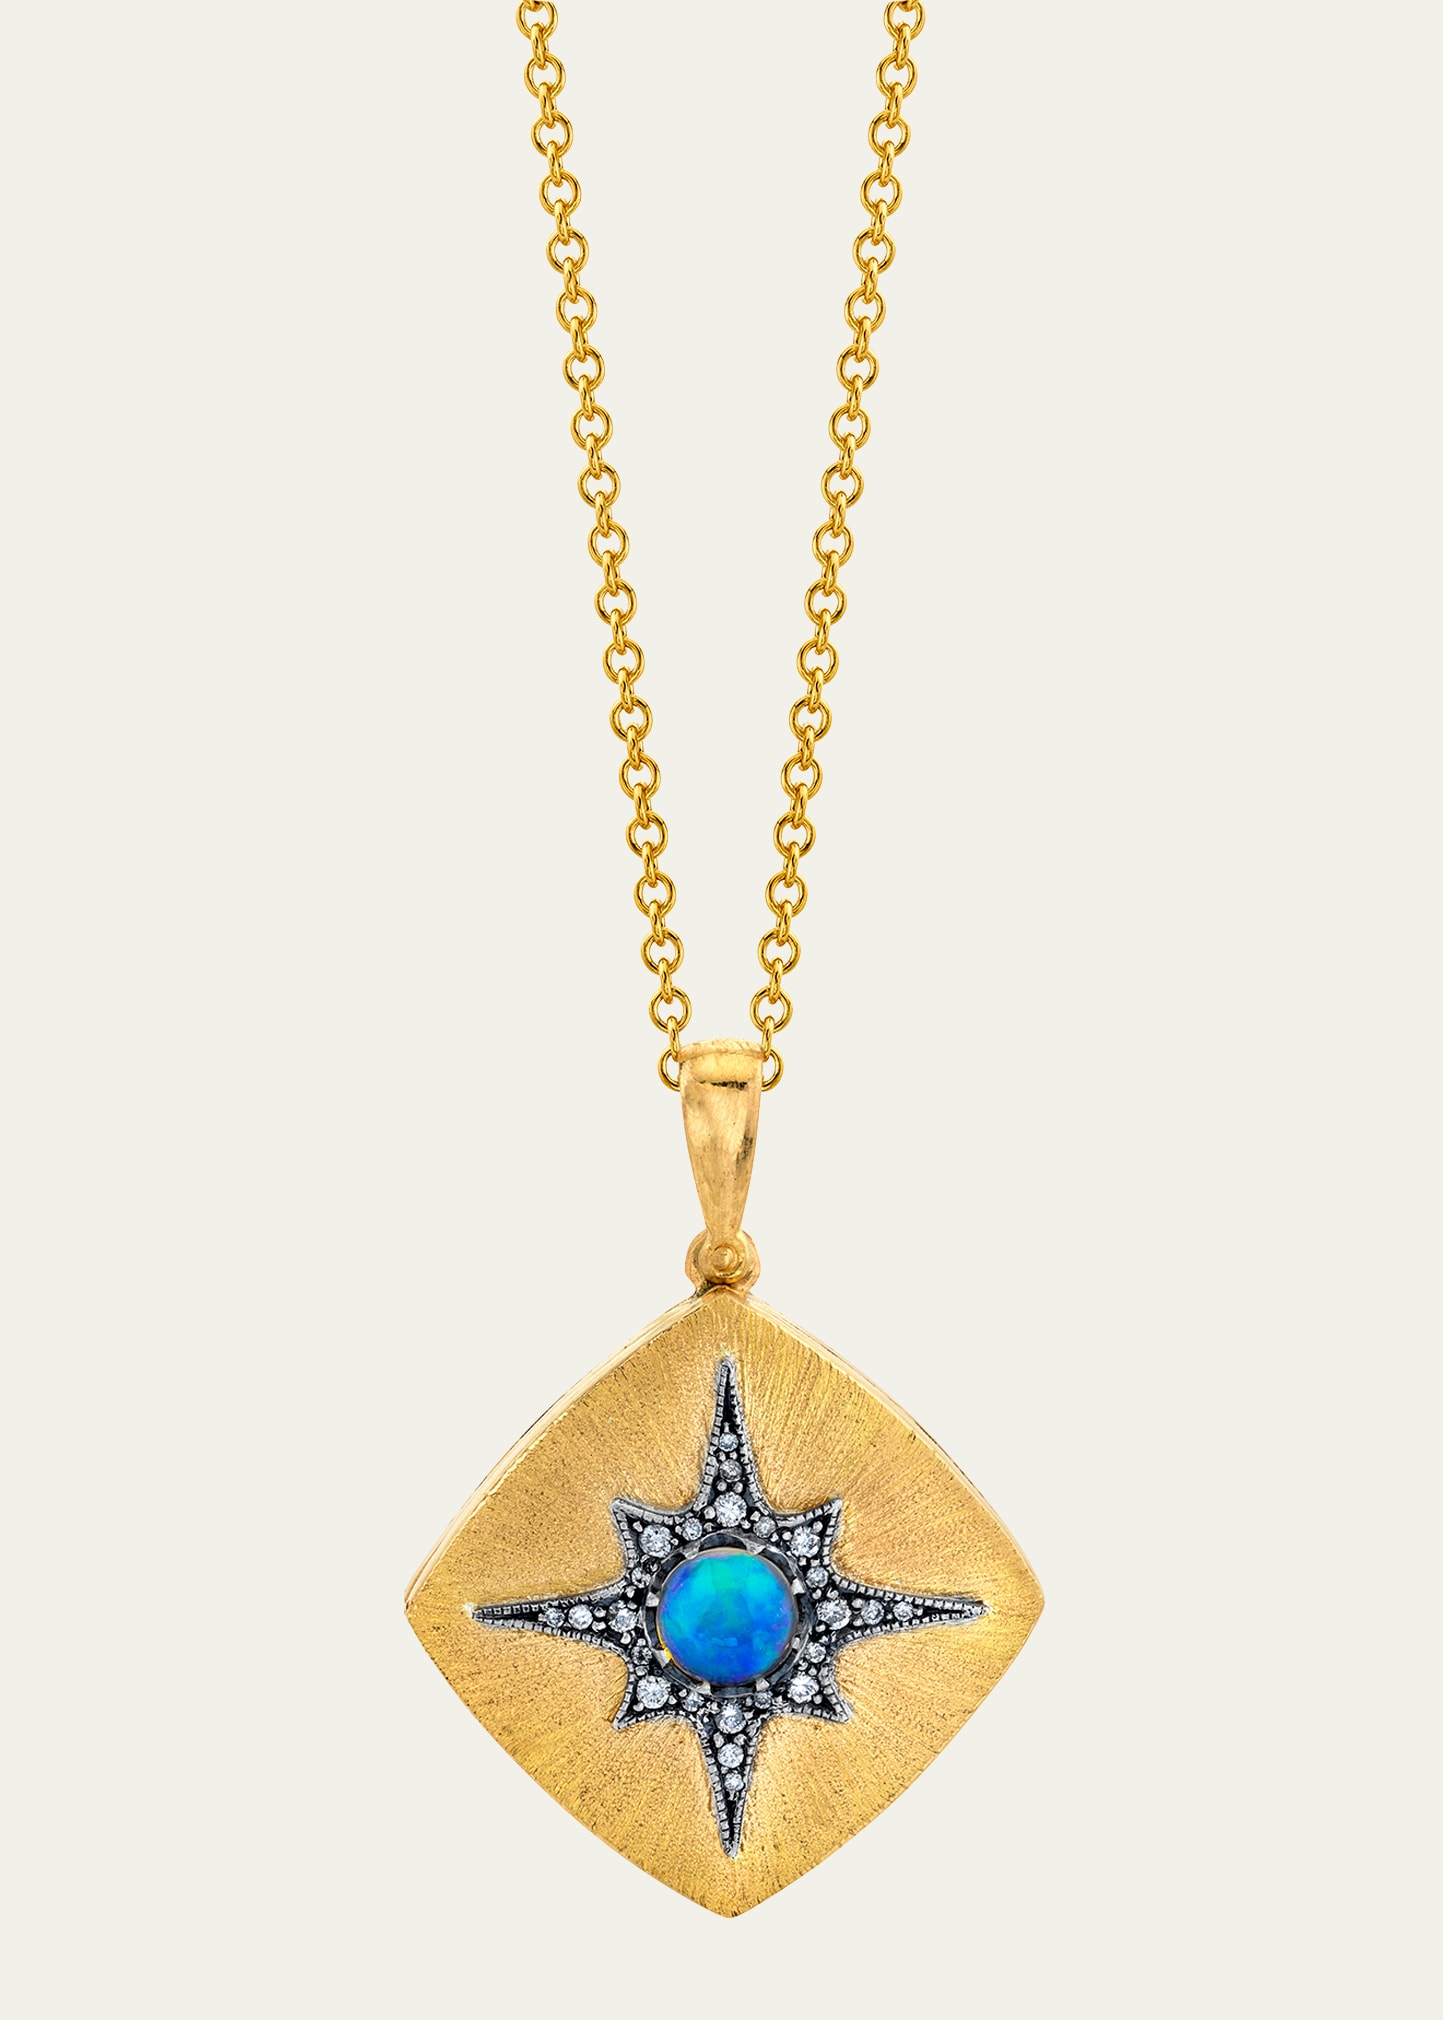 Arman Sarkisyan Square Locket With Opal And Diamond Starburst On 22k Gold Chain In Yg